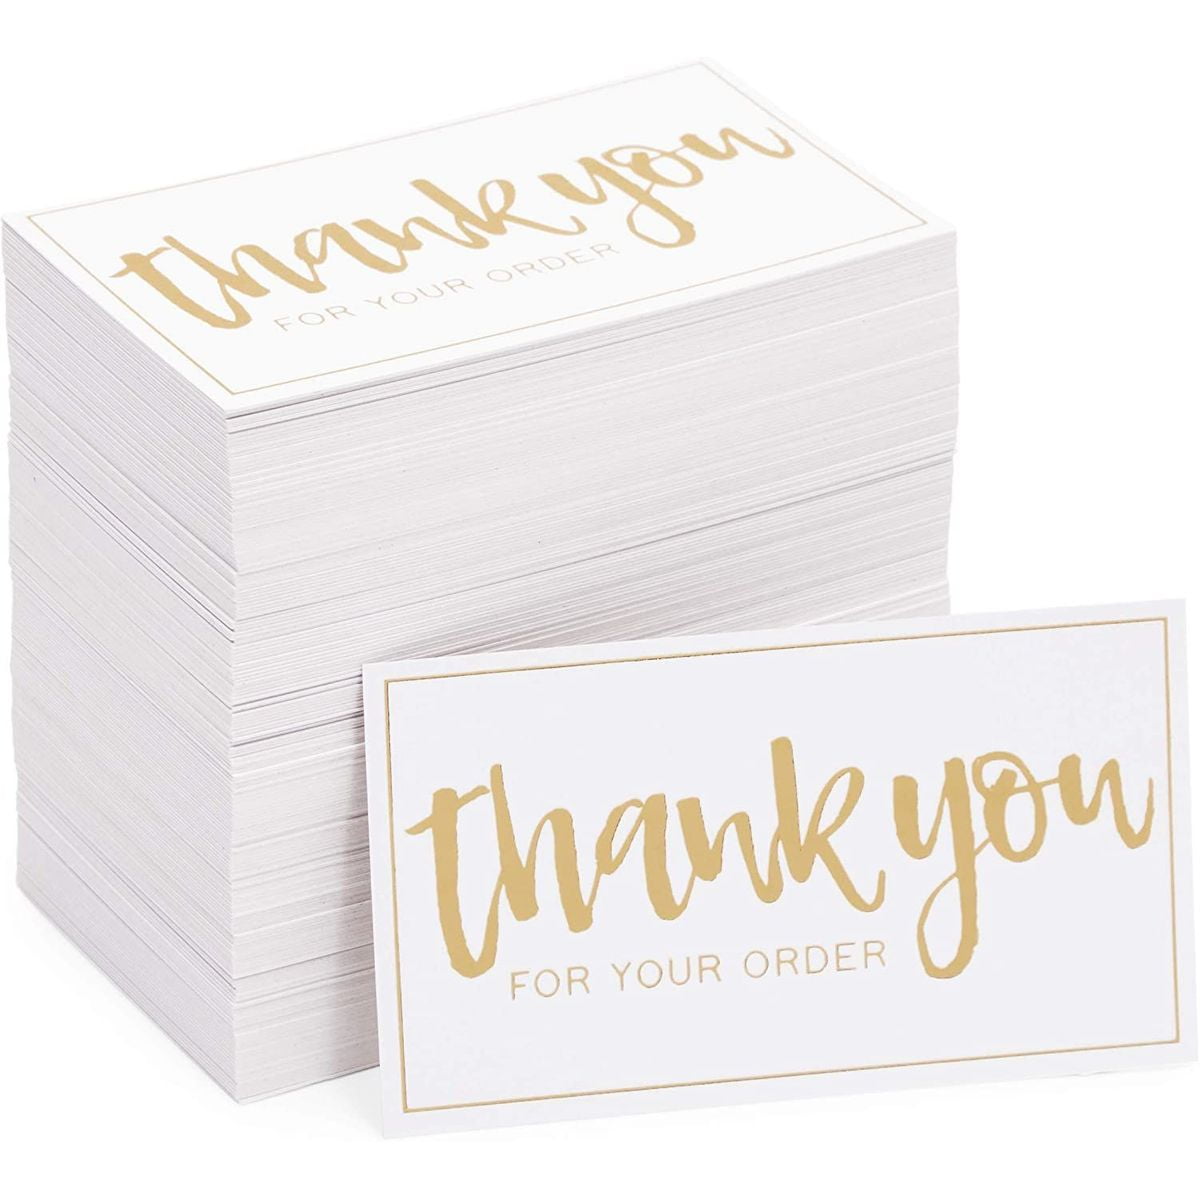  MR FIVE 100 Sheets Large Size Gold Thank You Tissue Paper  Bulk,20 x 28,Gold Thank You Tissue Paper for Packaging,Small  Business,Gold Tissue Paper for Mother's Day,Birthday,Thanksgiving (Pink) :  Health & Household